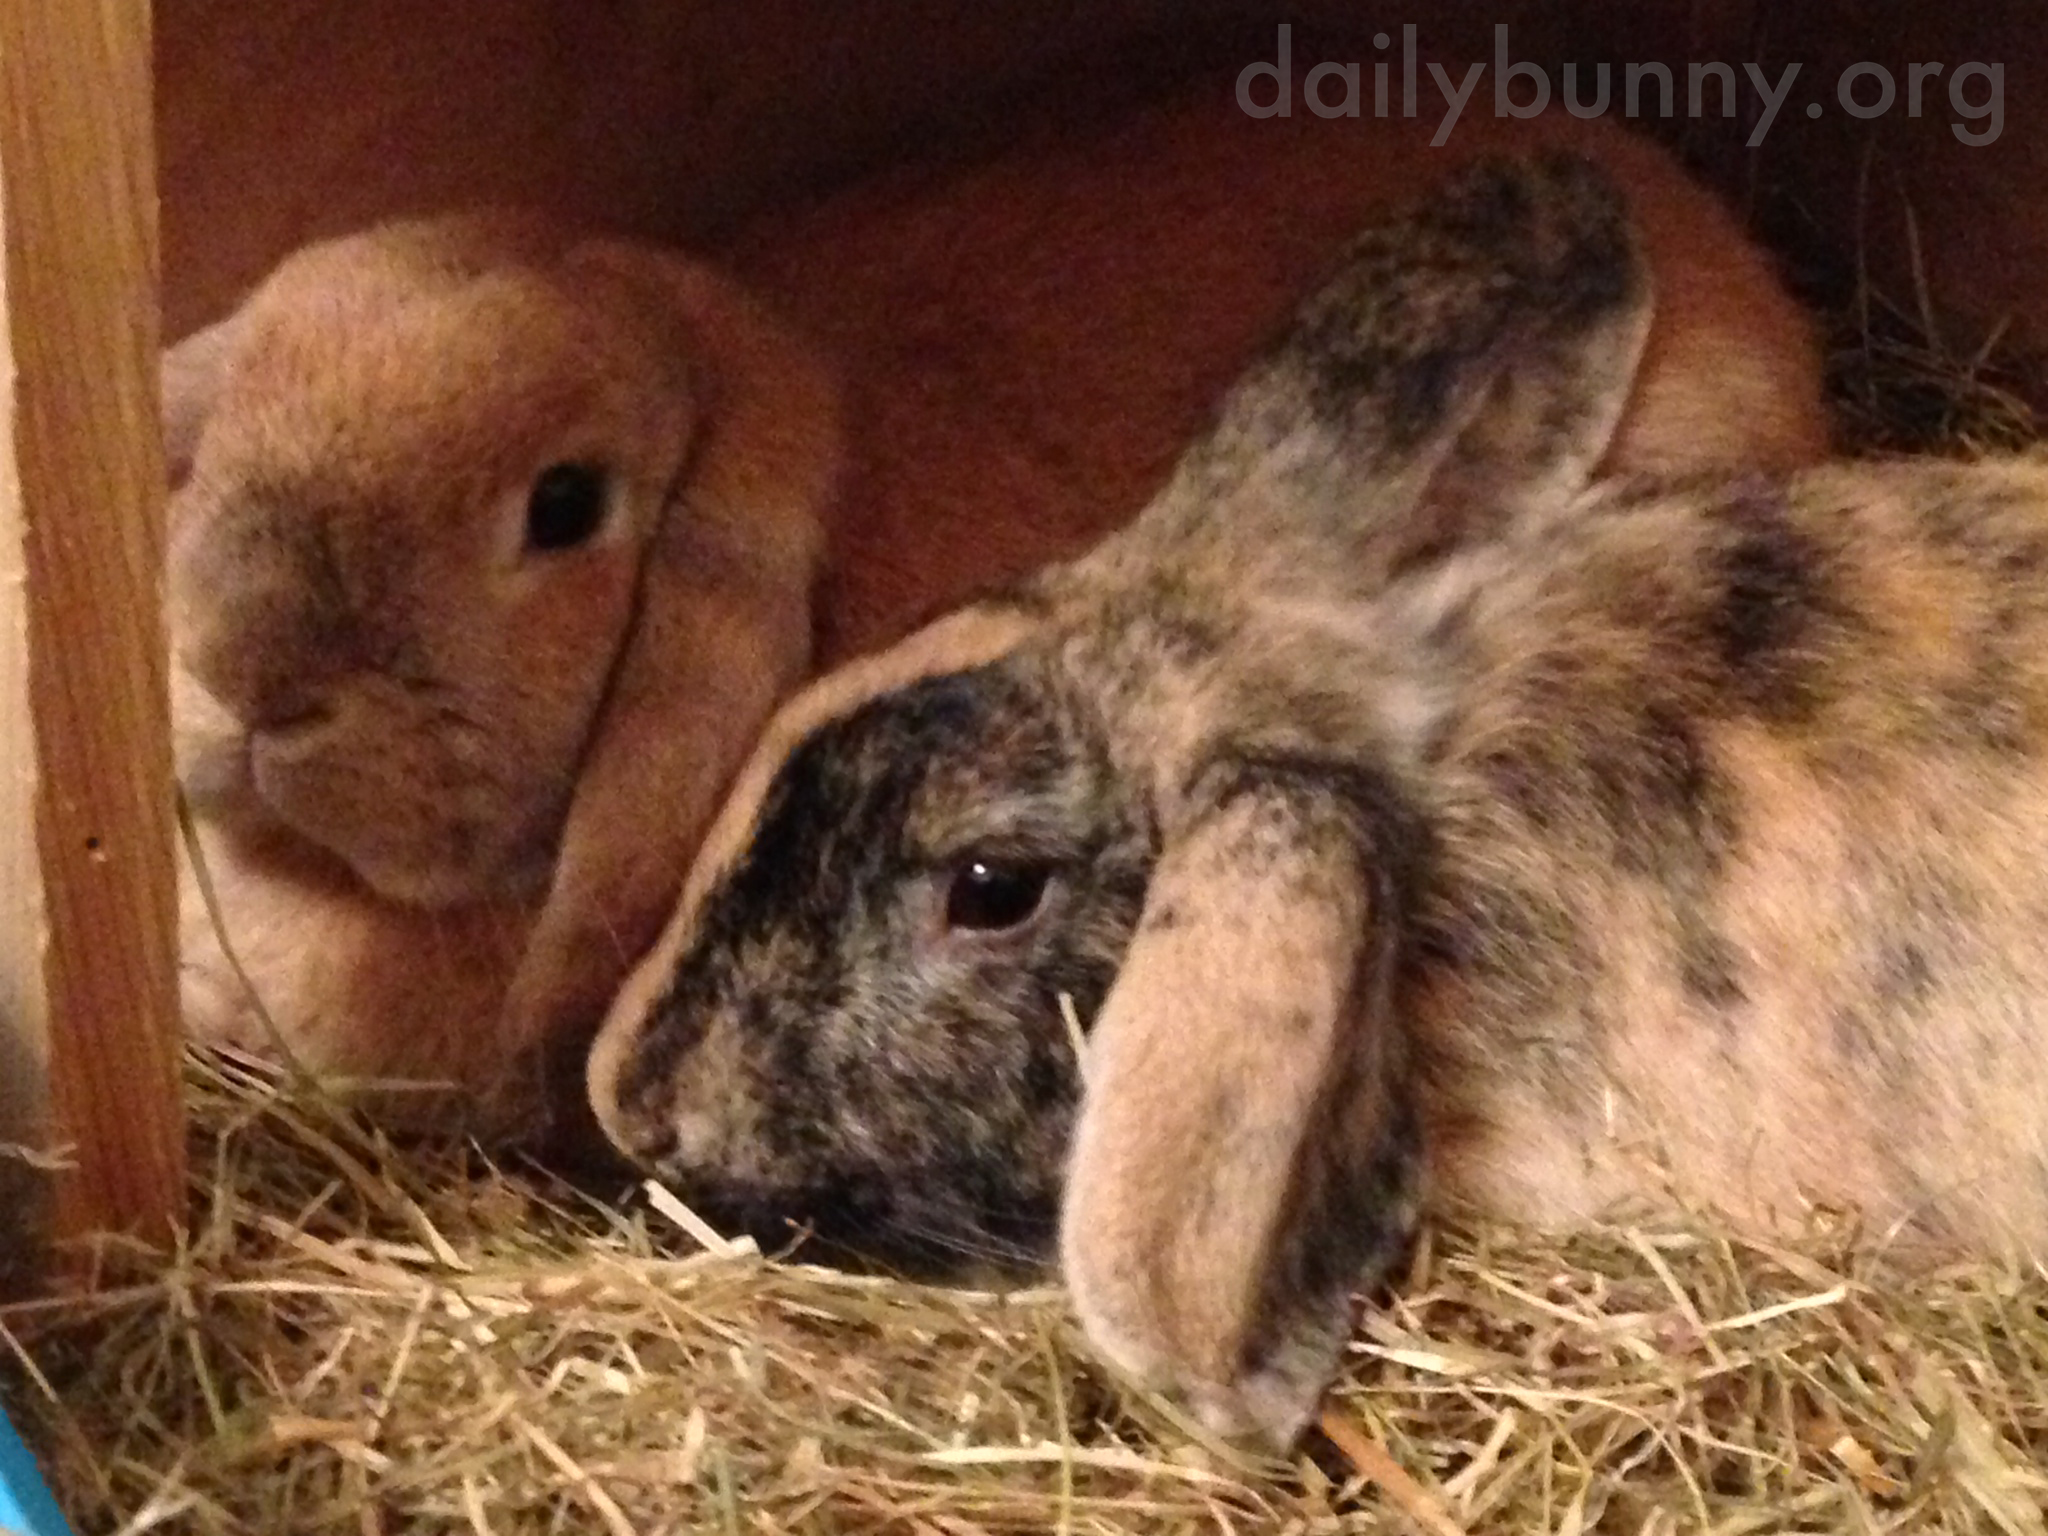 Bunnies Quietly, Peacefully Lie Together